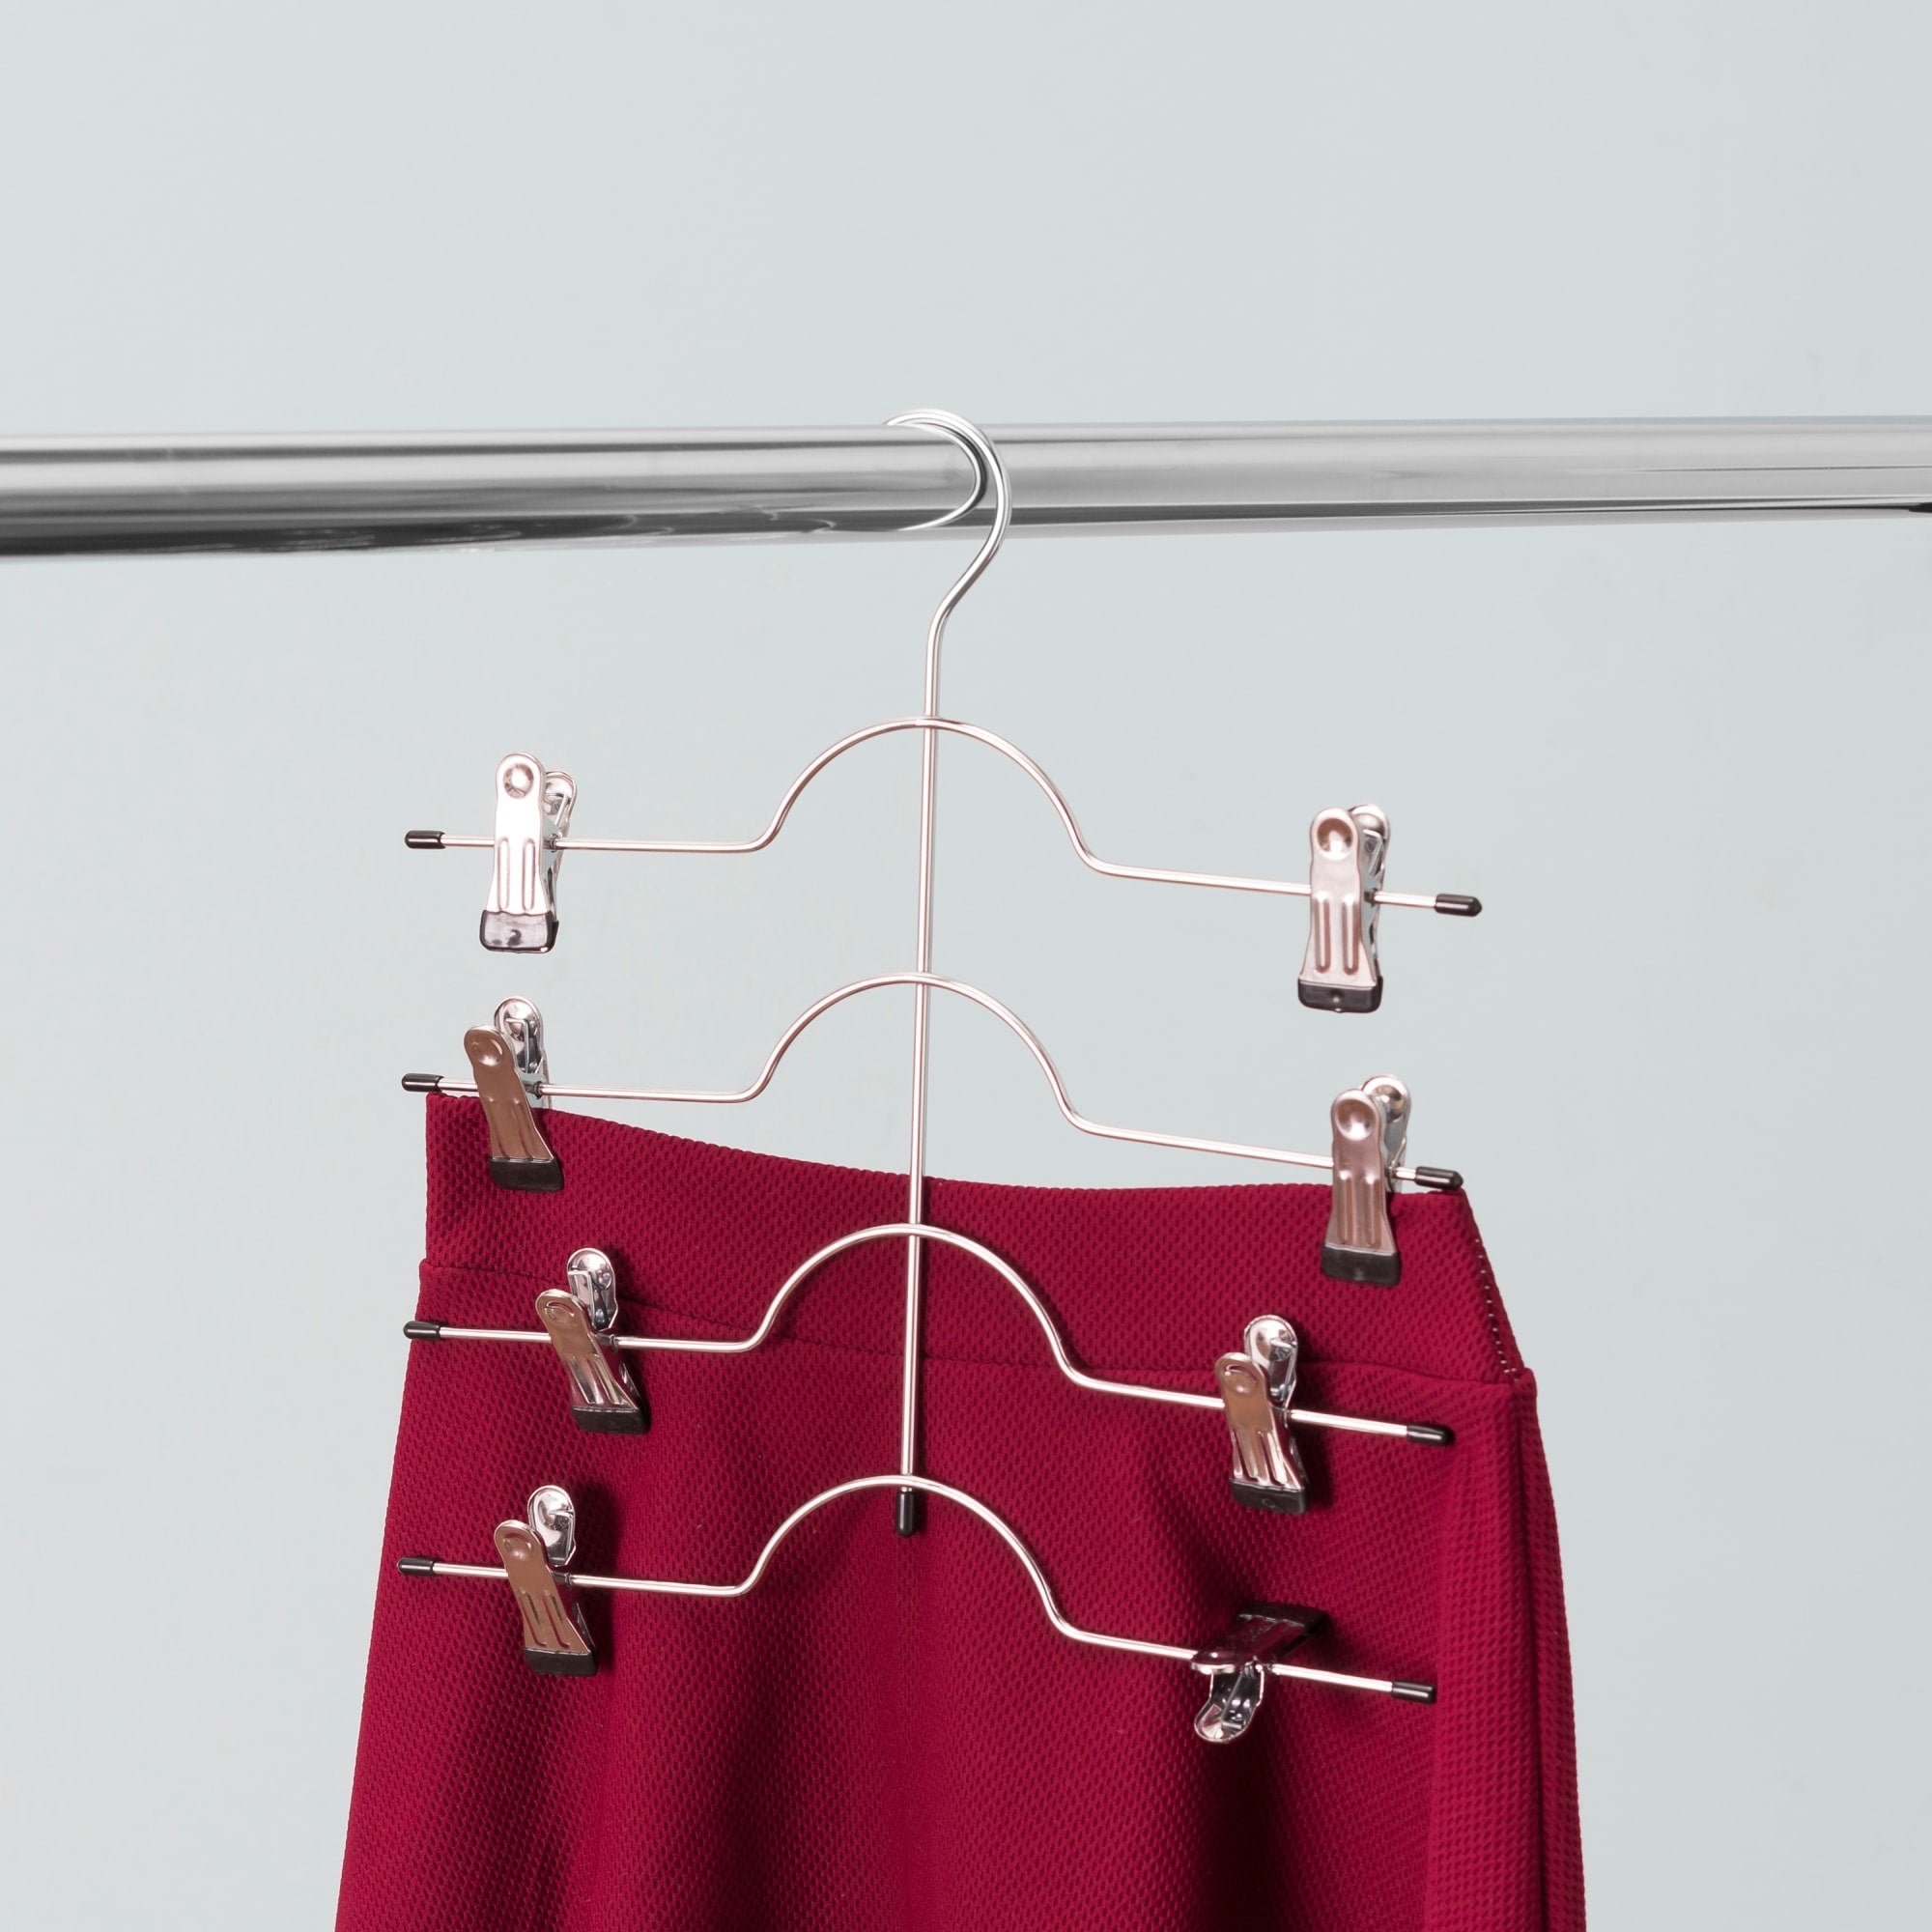 Home Basics 4 Tier Chrome Hanger with Clips, Black PVC Coated $3.00 EACH, CASE PACK OF 12